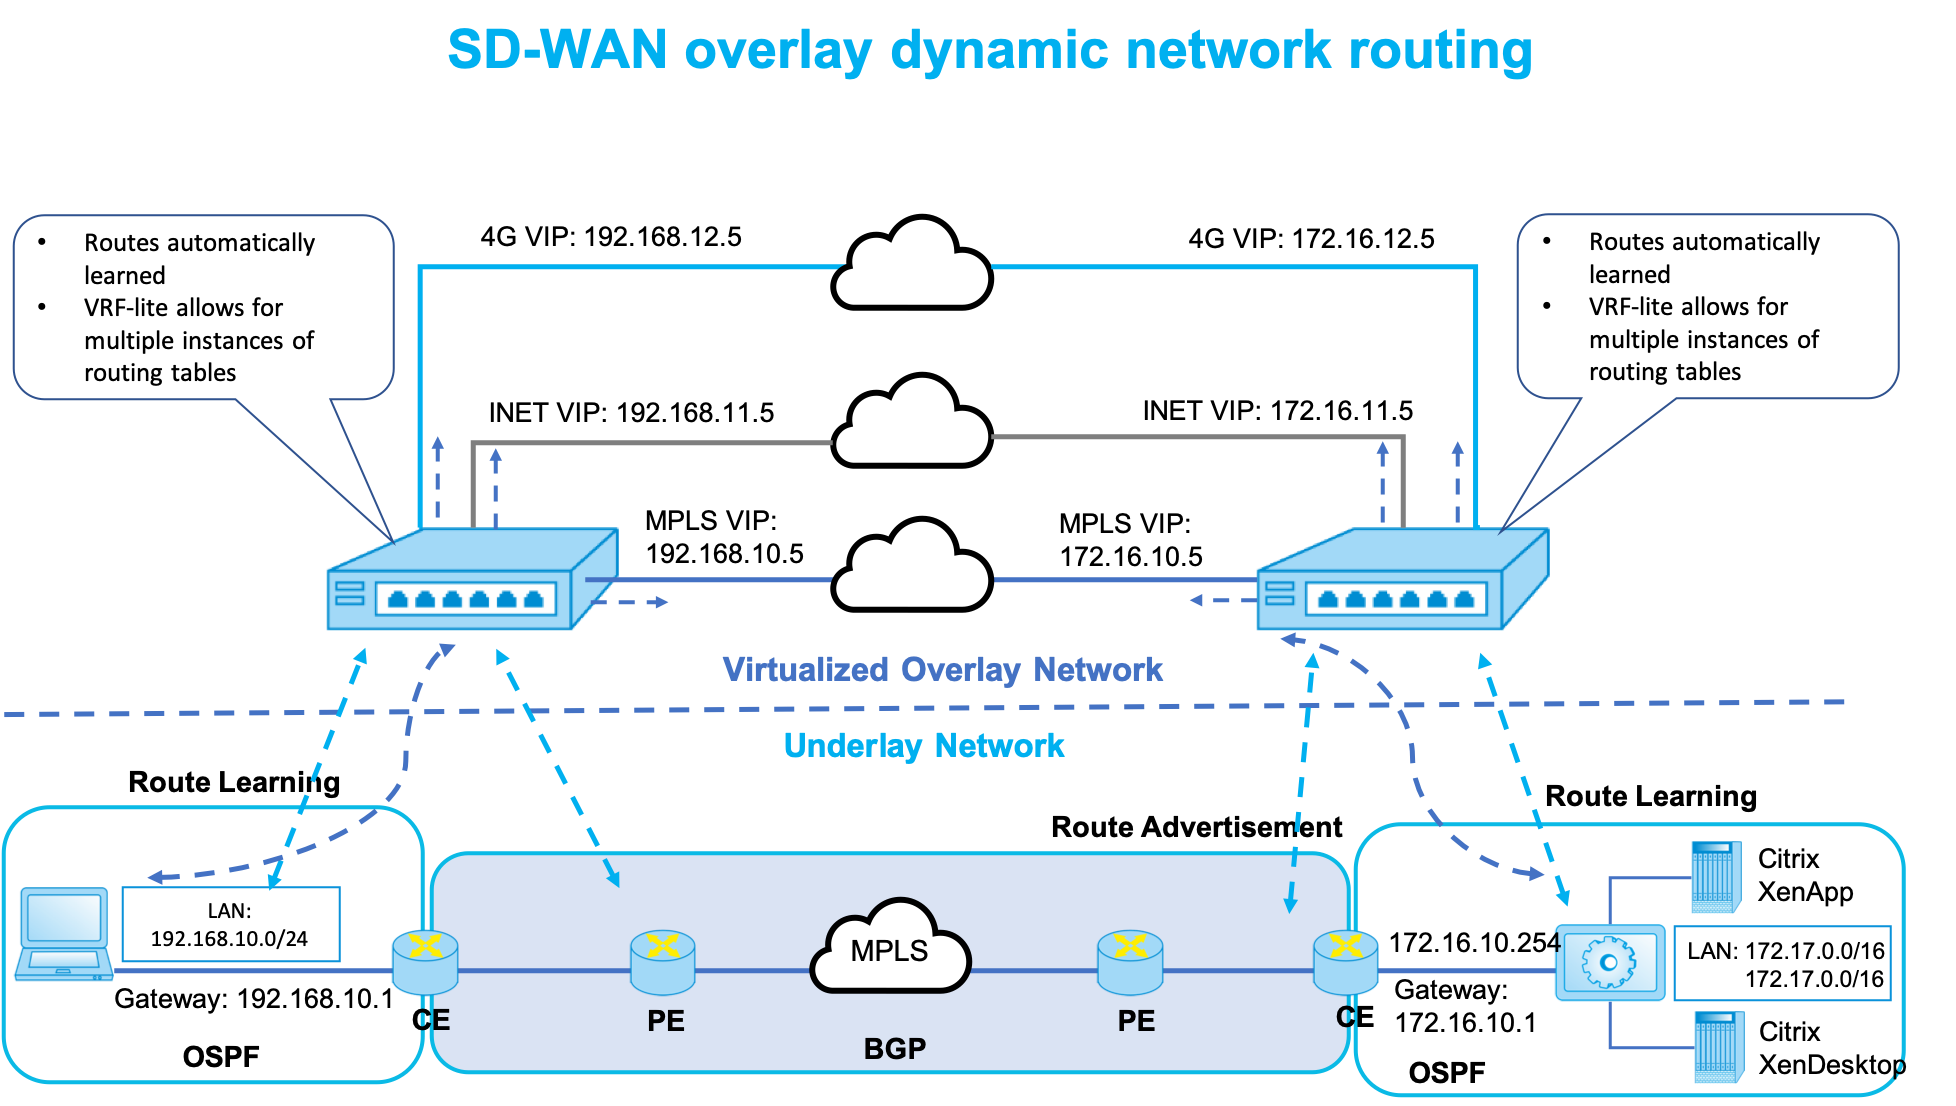 Dynamisches SD-WAN Routing